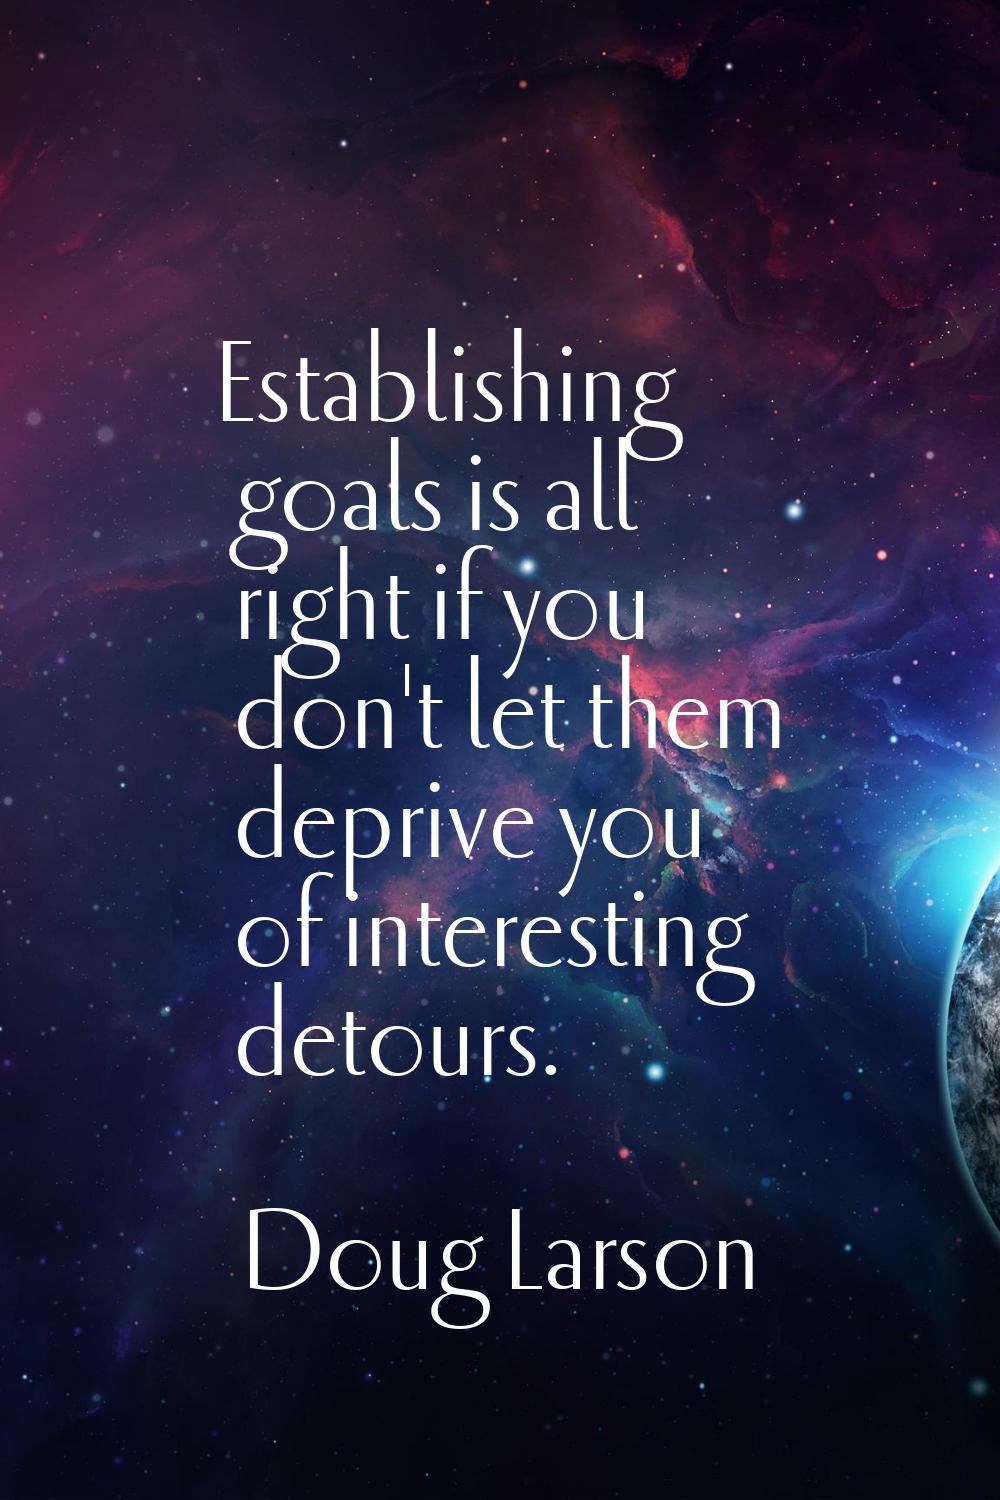 Establishing goals is all right if you don't let them deprive you of interesting detours.